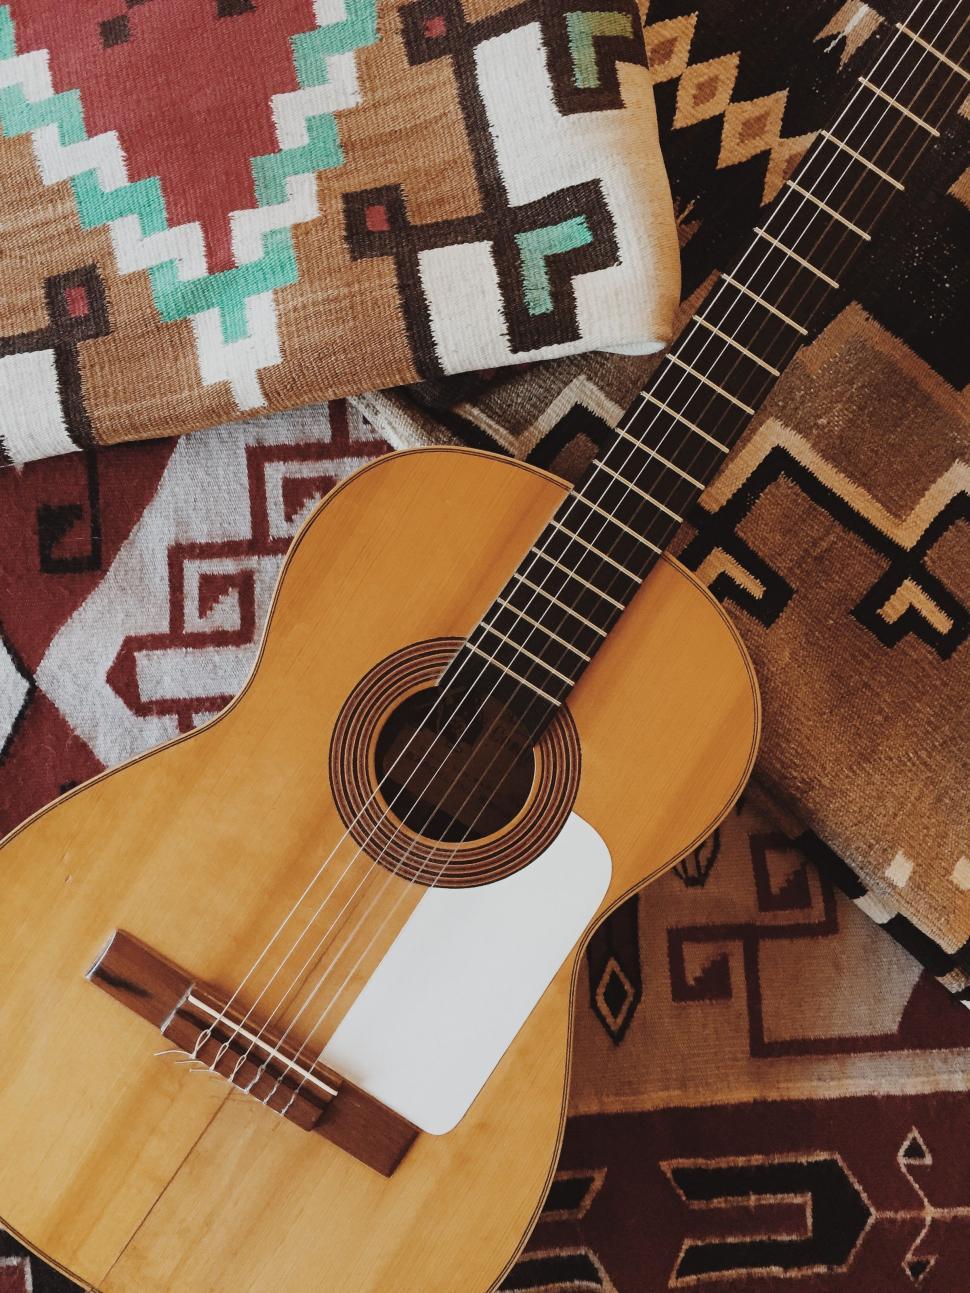 Free Image of Wooden Guitar on Rug 